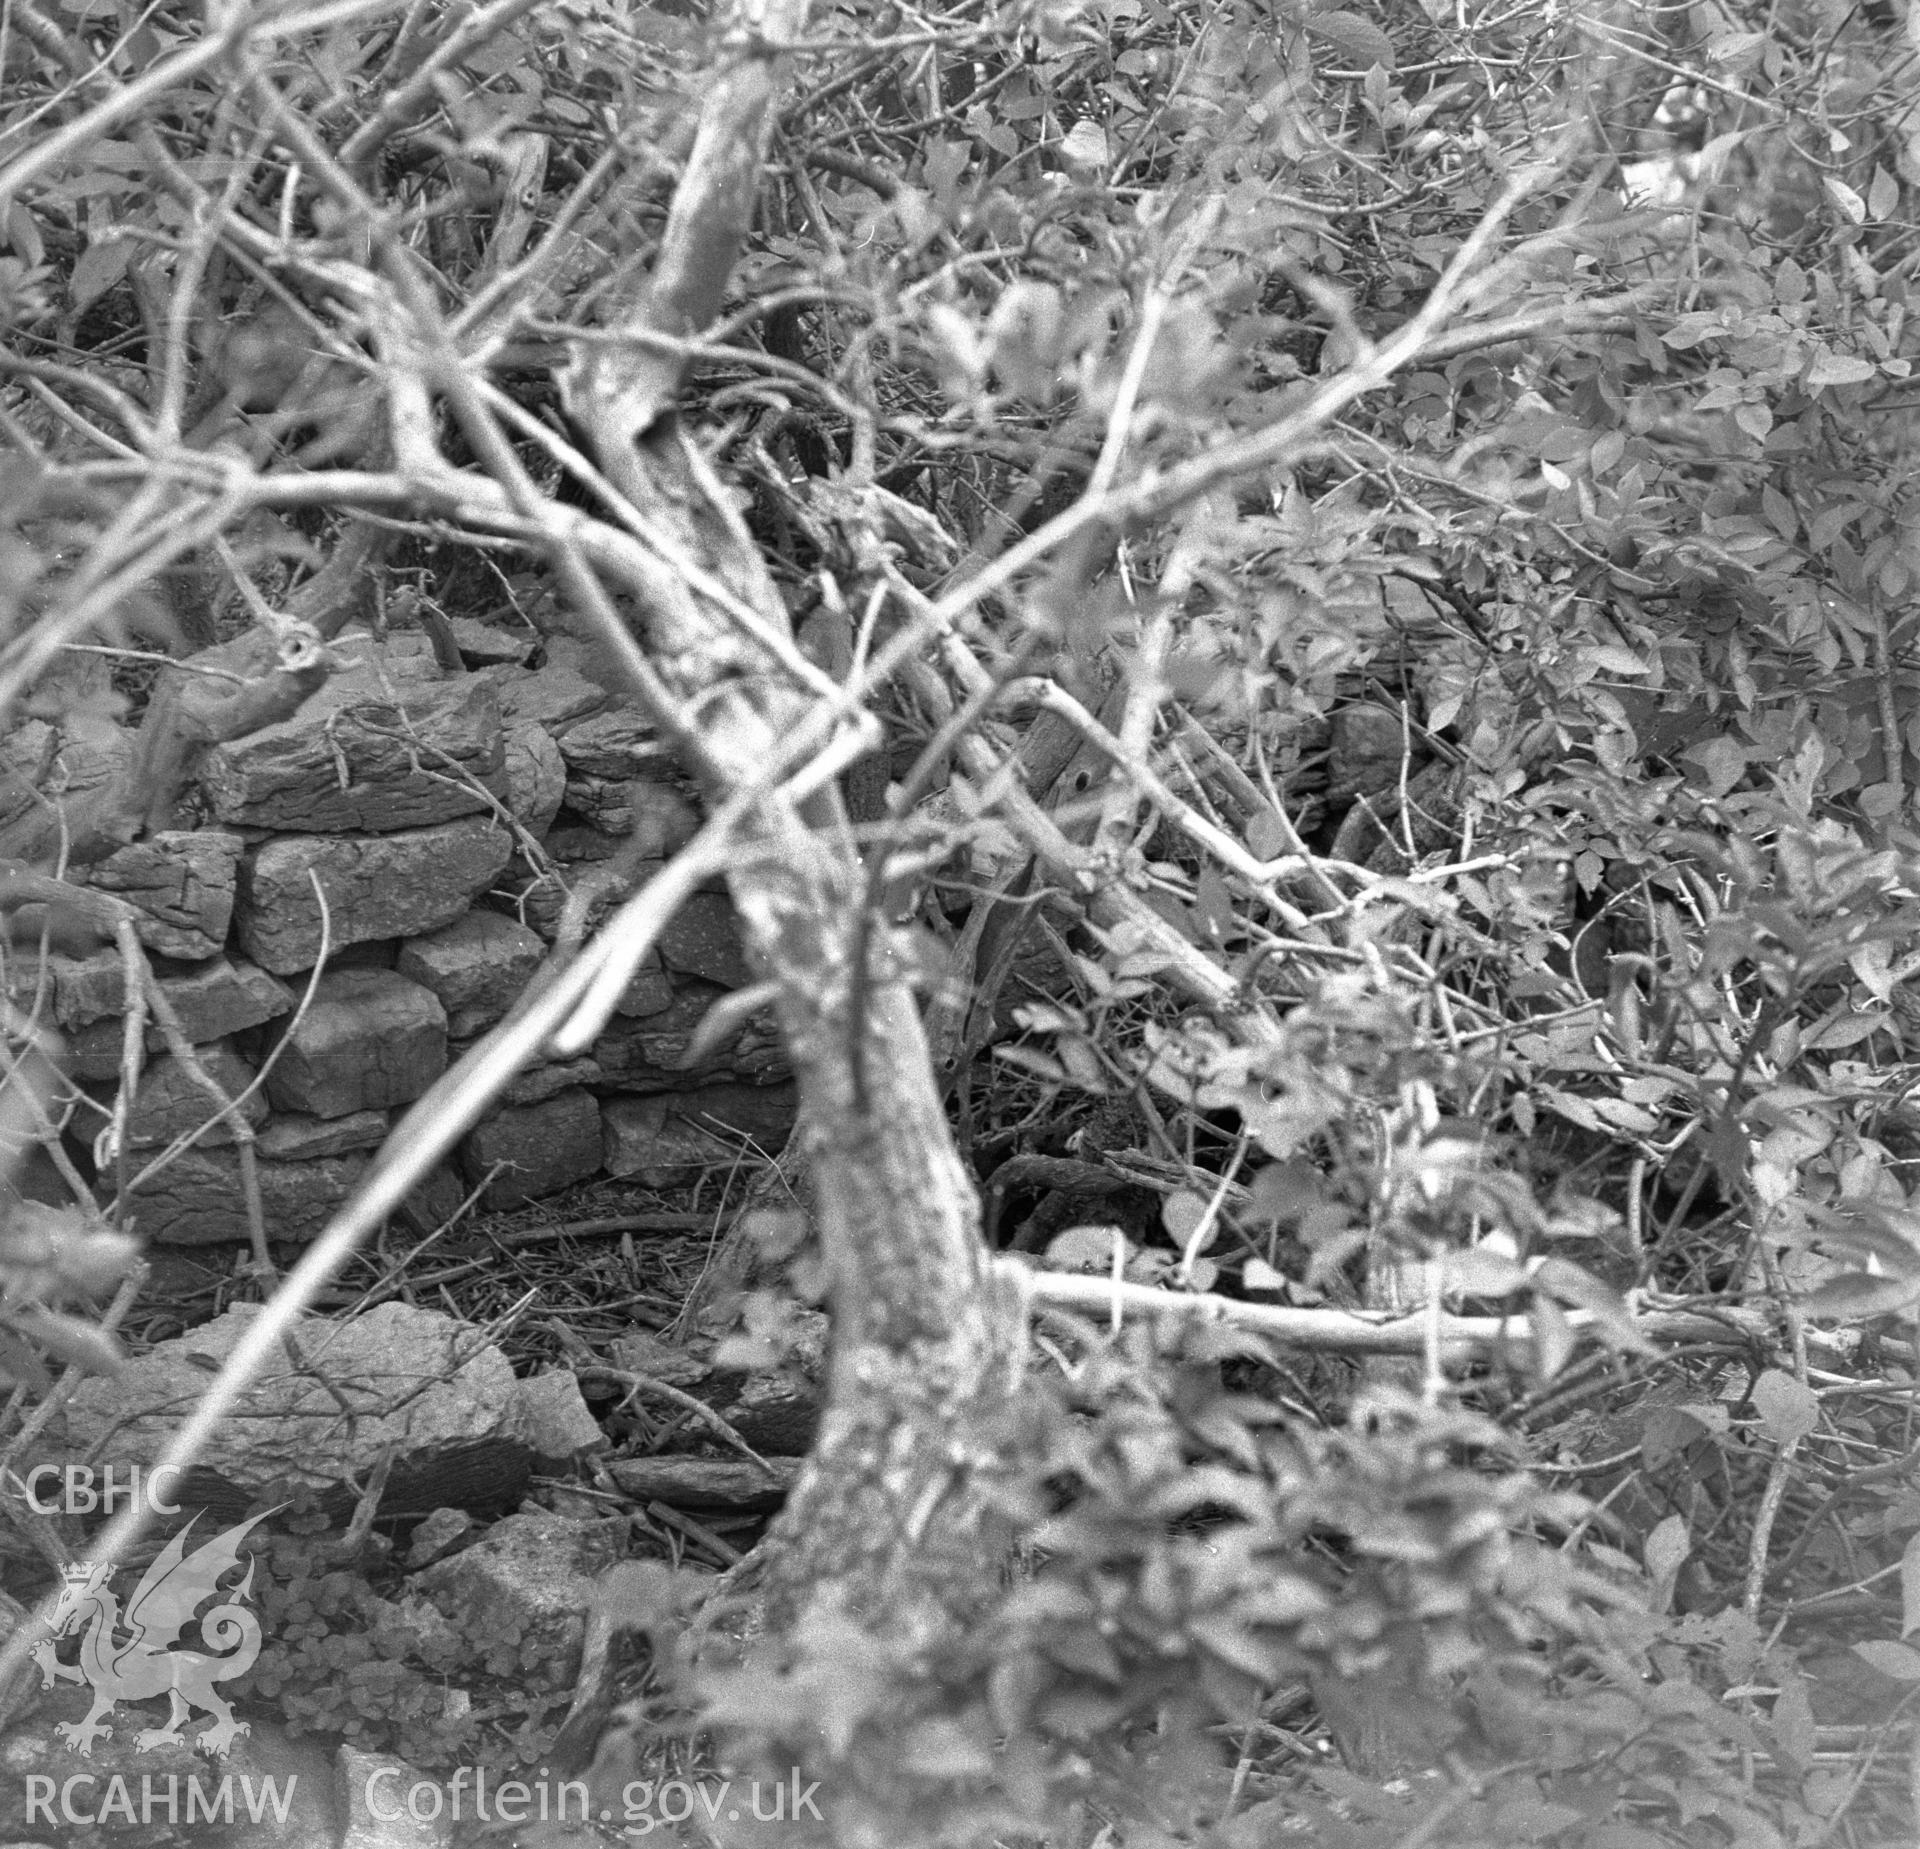 Digital copy of a black and white negative showing a stone wall in the undergrowth on Puffin Island, taken by RCAHMW.